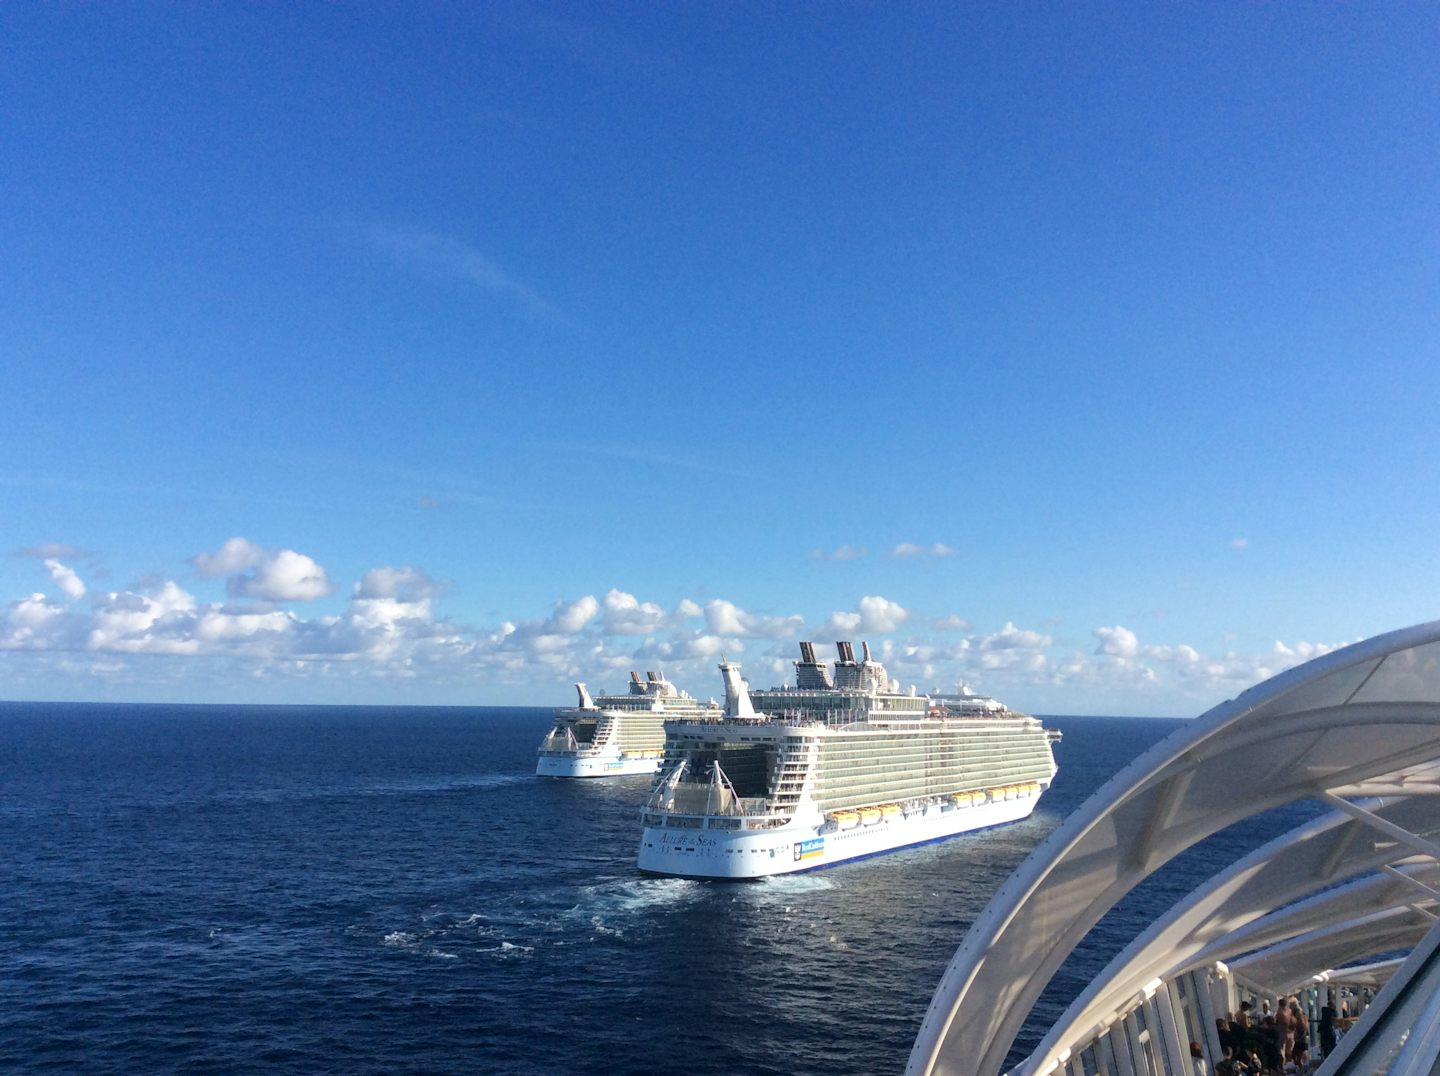 Meeting of the Three Sisters viewed from Harmony of the Seas